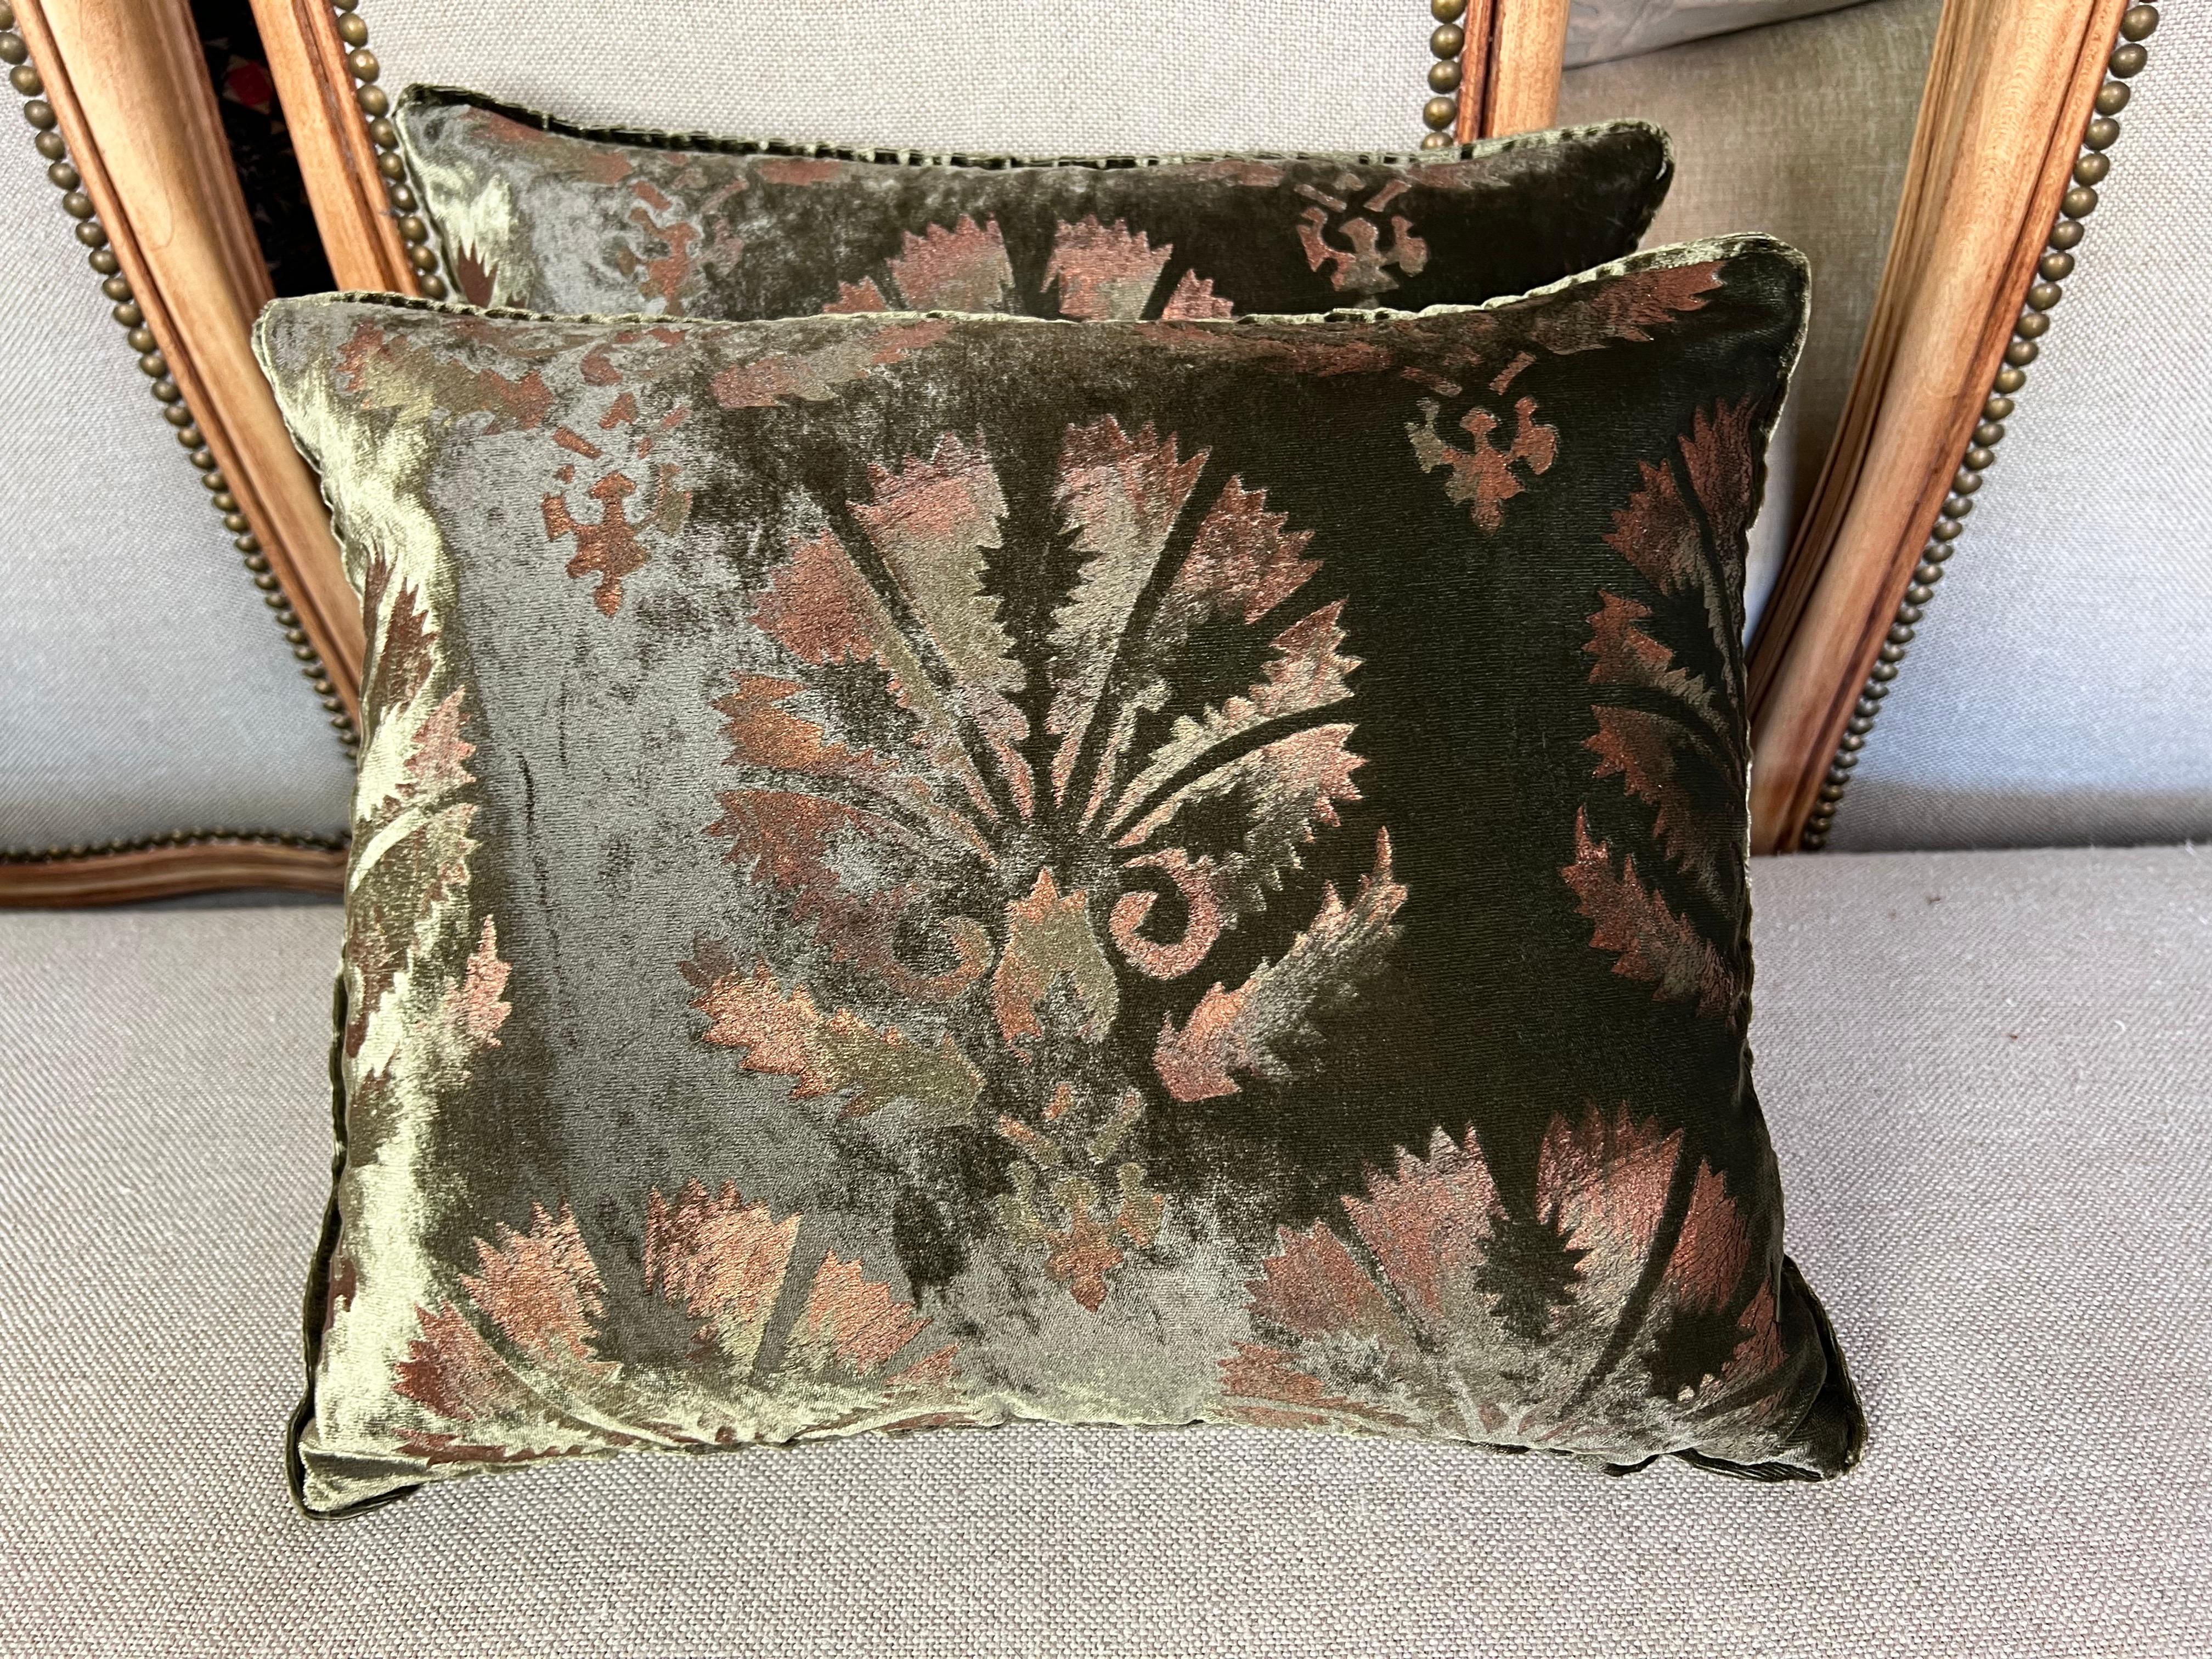 Pair of Custom Nomi Textiles olive green stenciled velvet pillows.  These pillows feature a damask design with delicate stenciling that has touches of pink and yellow on olive green velvet, backed with a coordinating olive green velvet.  The pillows